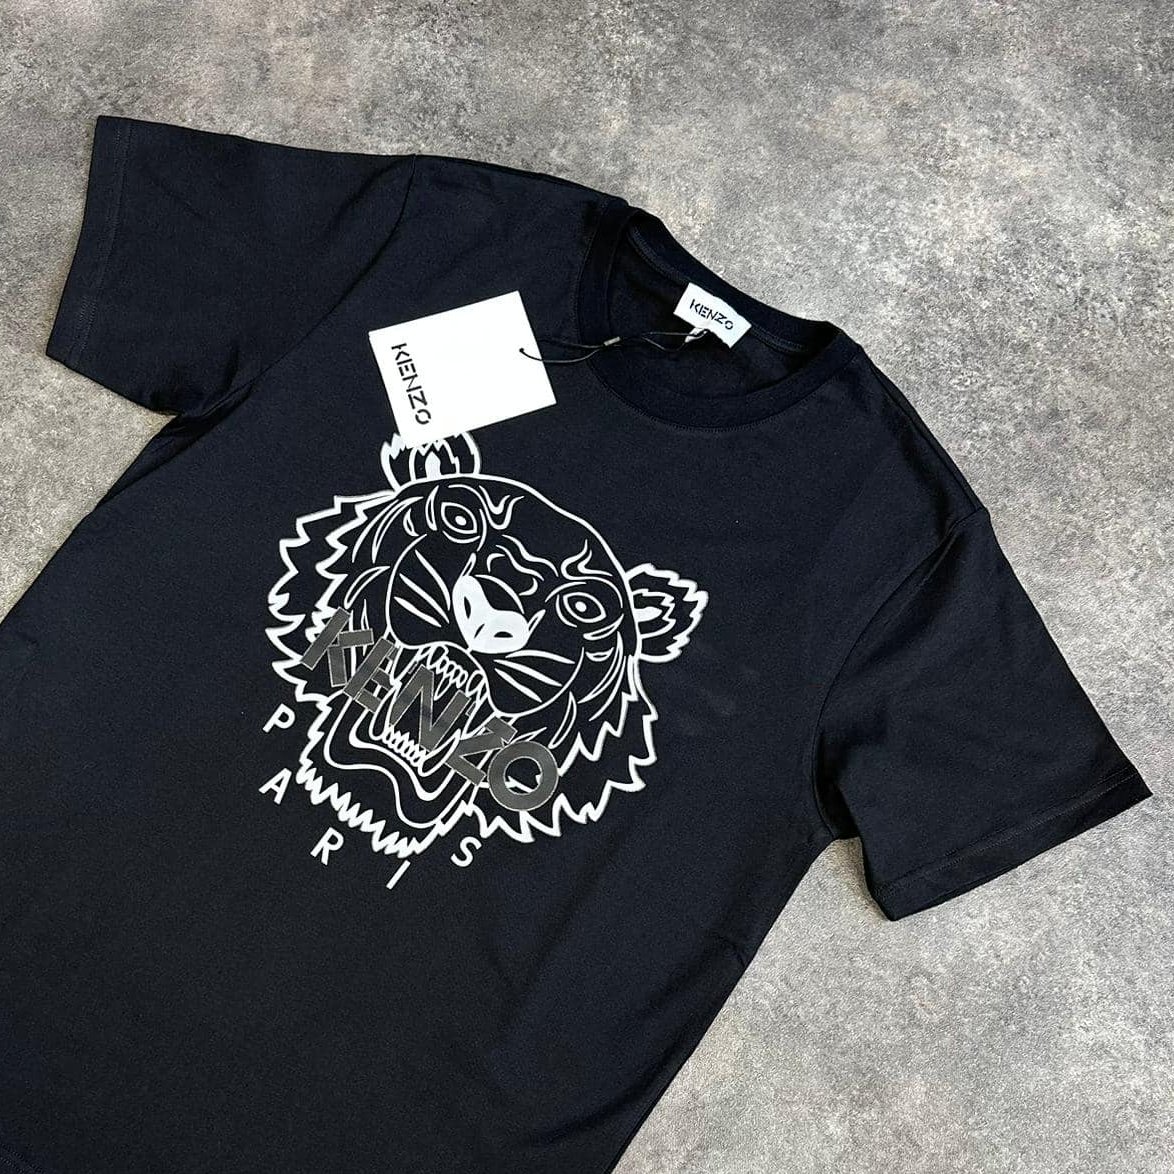 Ad:🦁Kenzo Tees now reduced further - 65% OFF JUST £36 Use code MADMAY20 at checkouts 🔗tidd.ly/4dvYDDd *RRP £105 - 8 colours available